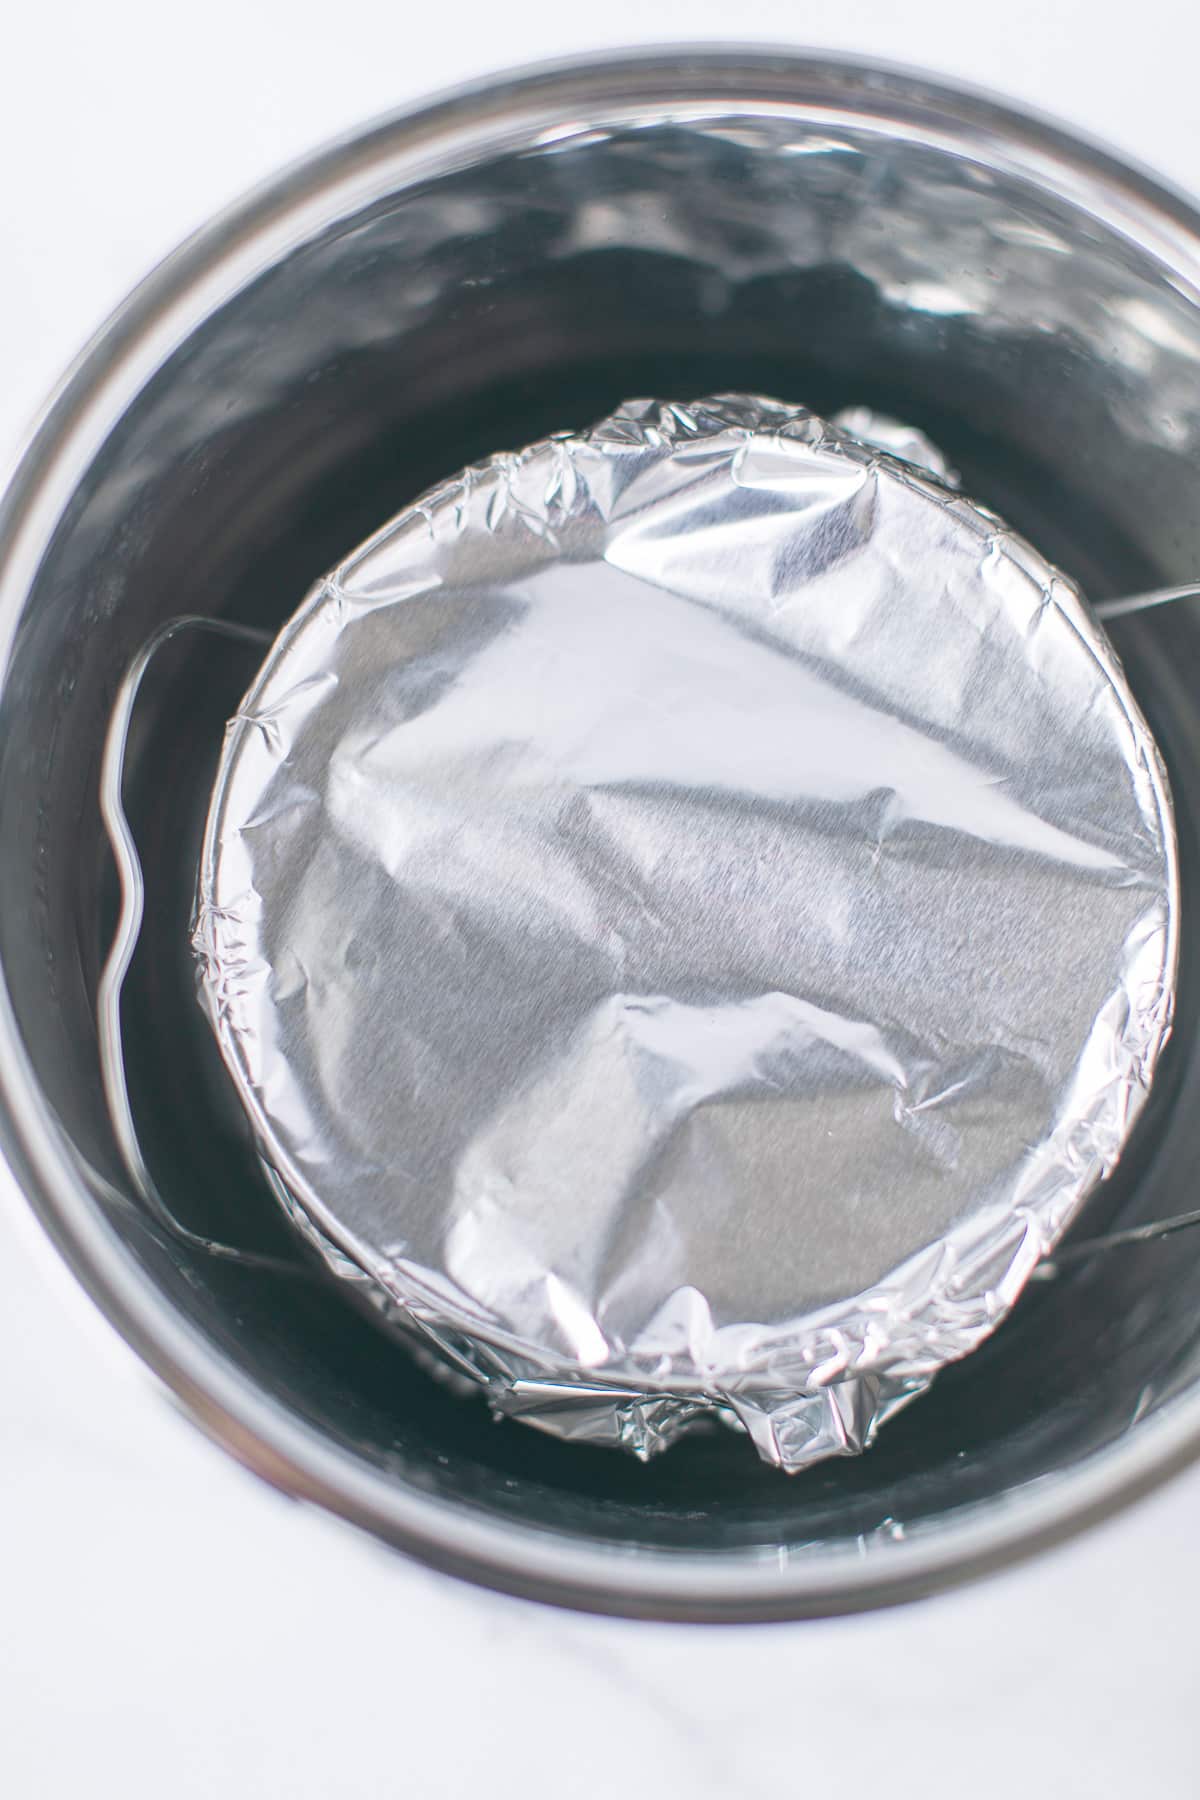 cake pan wrapped in foil inside the instant pot pressure cooker.